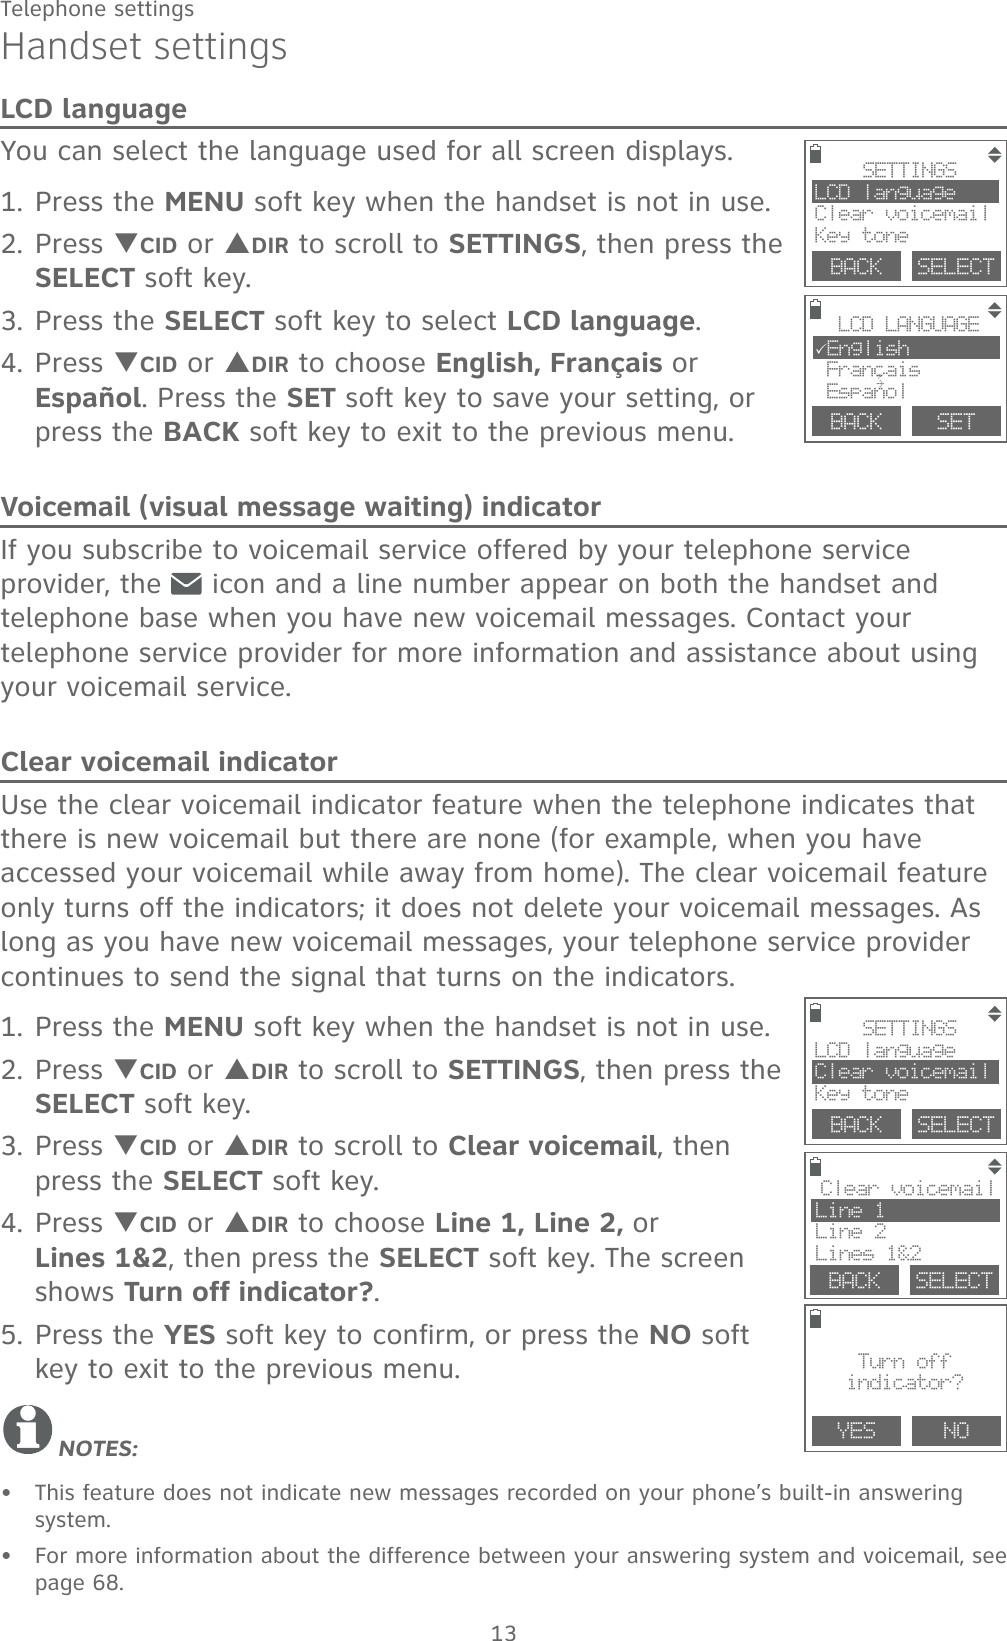 13Telephone settingsHandset settingsLCD languageYou can select the language used for all screen displays.1. Press the MENU soft key when the handset is not in use.2. Press TCID or SDIR to scroll to SETTINGS, then press the SELECT soft key.3. Press the SELECT soft key to select LCD language.4. Press TCID or SDIR to choose English, Français or Español. Press the SET soft key to save your setting, or press the BACK soft key to exit to the previous menu.Voicemail (visual message waiting) indicatorIf you subscribe to voicemail service offered by your telephone service provider, the   icon and a line number appear on both the handset and telephone base when you have new voicemail messages. Contact your telephone service provider for more information and assistance about using your voicemail service. Clear voicemail indicatorUse the clear voicemail indicator feature when the telephone indicates that there is new voicemail but there are none (for example, when you have accessed your voicemail while away from home). The clear voicemail feature only turns off the indicators; it does not delete your voicemail messages. As long as you have new voicemail messages, your telephone service provider continues to send the signal that turns on the indicators.1. Press the MENU soft key when the handset is not in use.2. Press TCID or SDIR to scroll to SETTINGS, then press the SELECT soft key.3. Press TCID or SDIR to scroll to Clear voicemail, then press the SELECT soft key.4. Press TCID or SDIR to choose Line 1, Line 2, or  Lines 1&amp;2, then press the SELECT soft key. The screen shows Turn off indicator?.5. Press the YES soft key to confirm, or press the NO soft key to exit to the previous menu.NOTES: This feature does not indicate new messages recorded on your phone’s built-in answering system.For more information about the difference between your answering system and voicemail, see page 68.••YES   Clear voicemail Line 1Line 2Lines 1&amp;2BACK    SELECTNOTurn offindicator?BACK    SELECTSETTINGSLCD languageClear voicemailKey toneBACK    SELECTSETTINGSLCD languageClear voicemailKey toneBACK    SETLCD LANGUAGE3English Francais Espanol,~